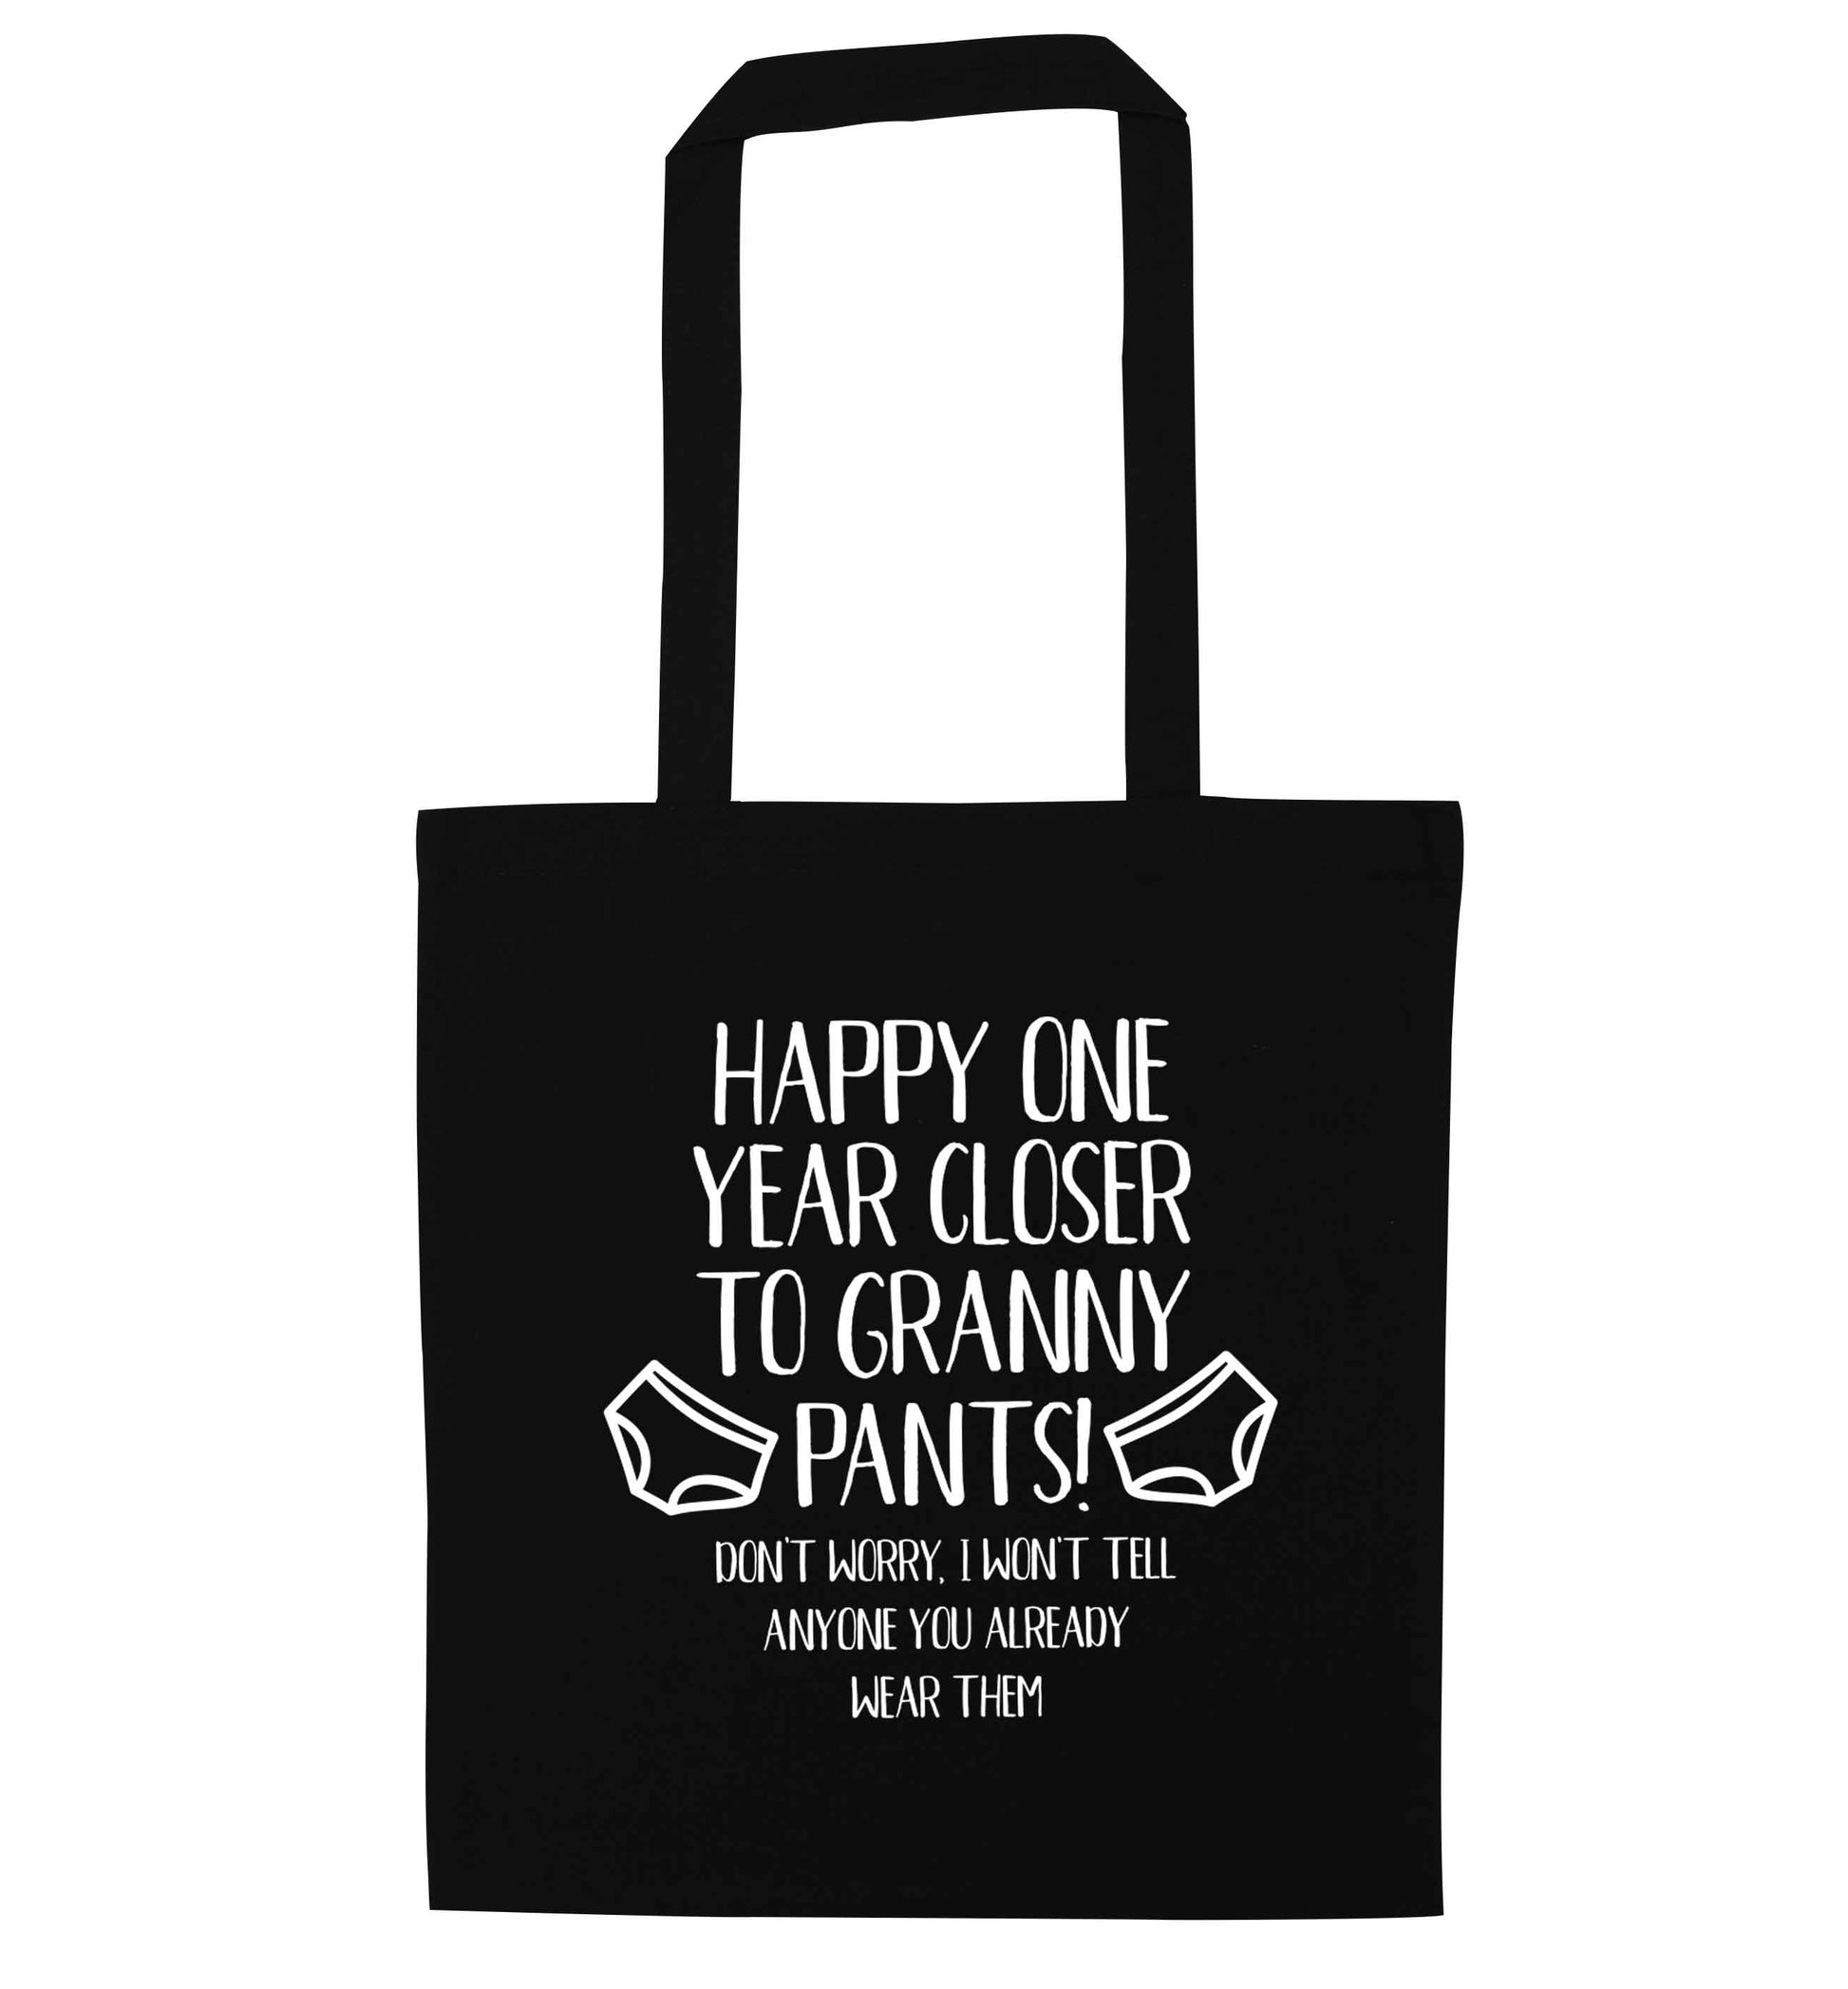 Happy one year closer to granny pants black tote bag